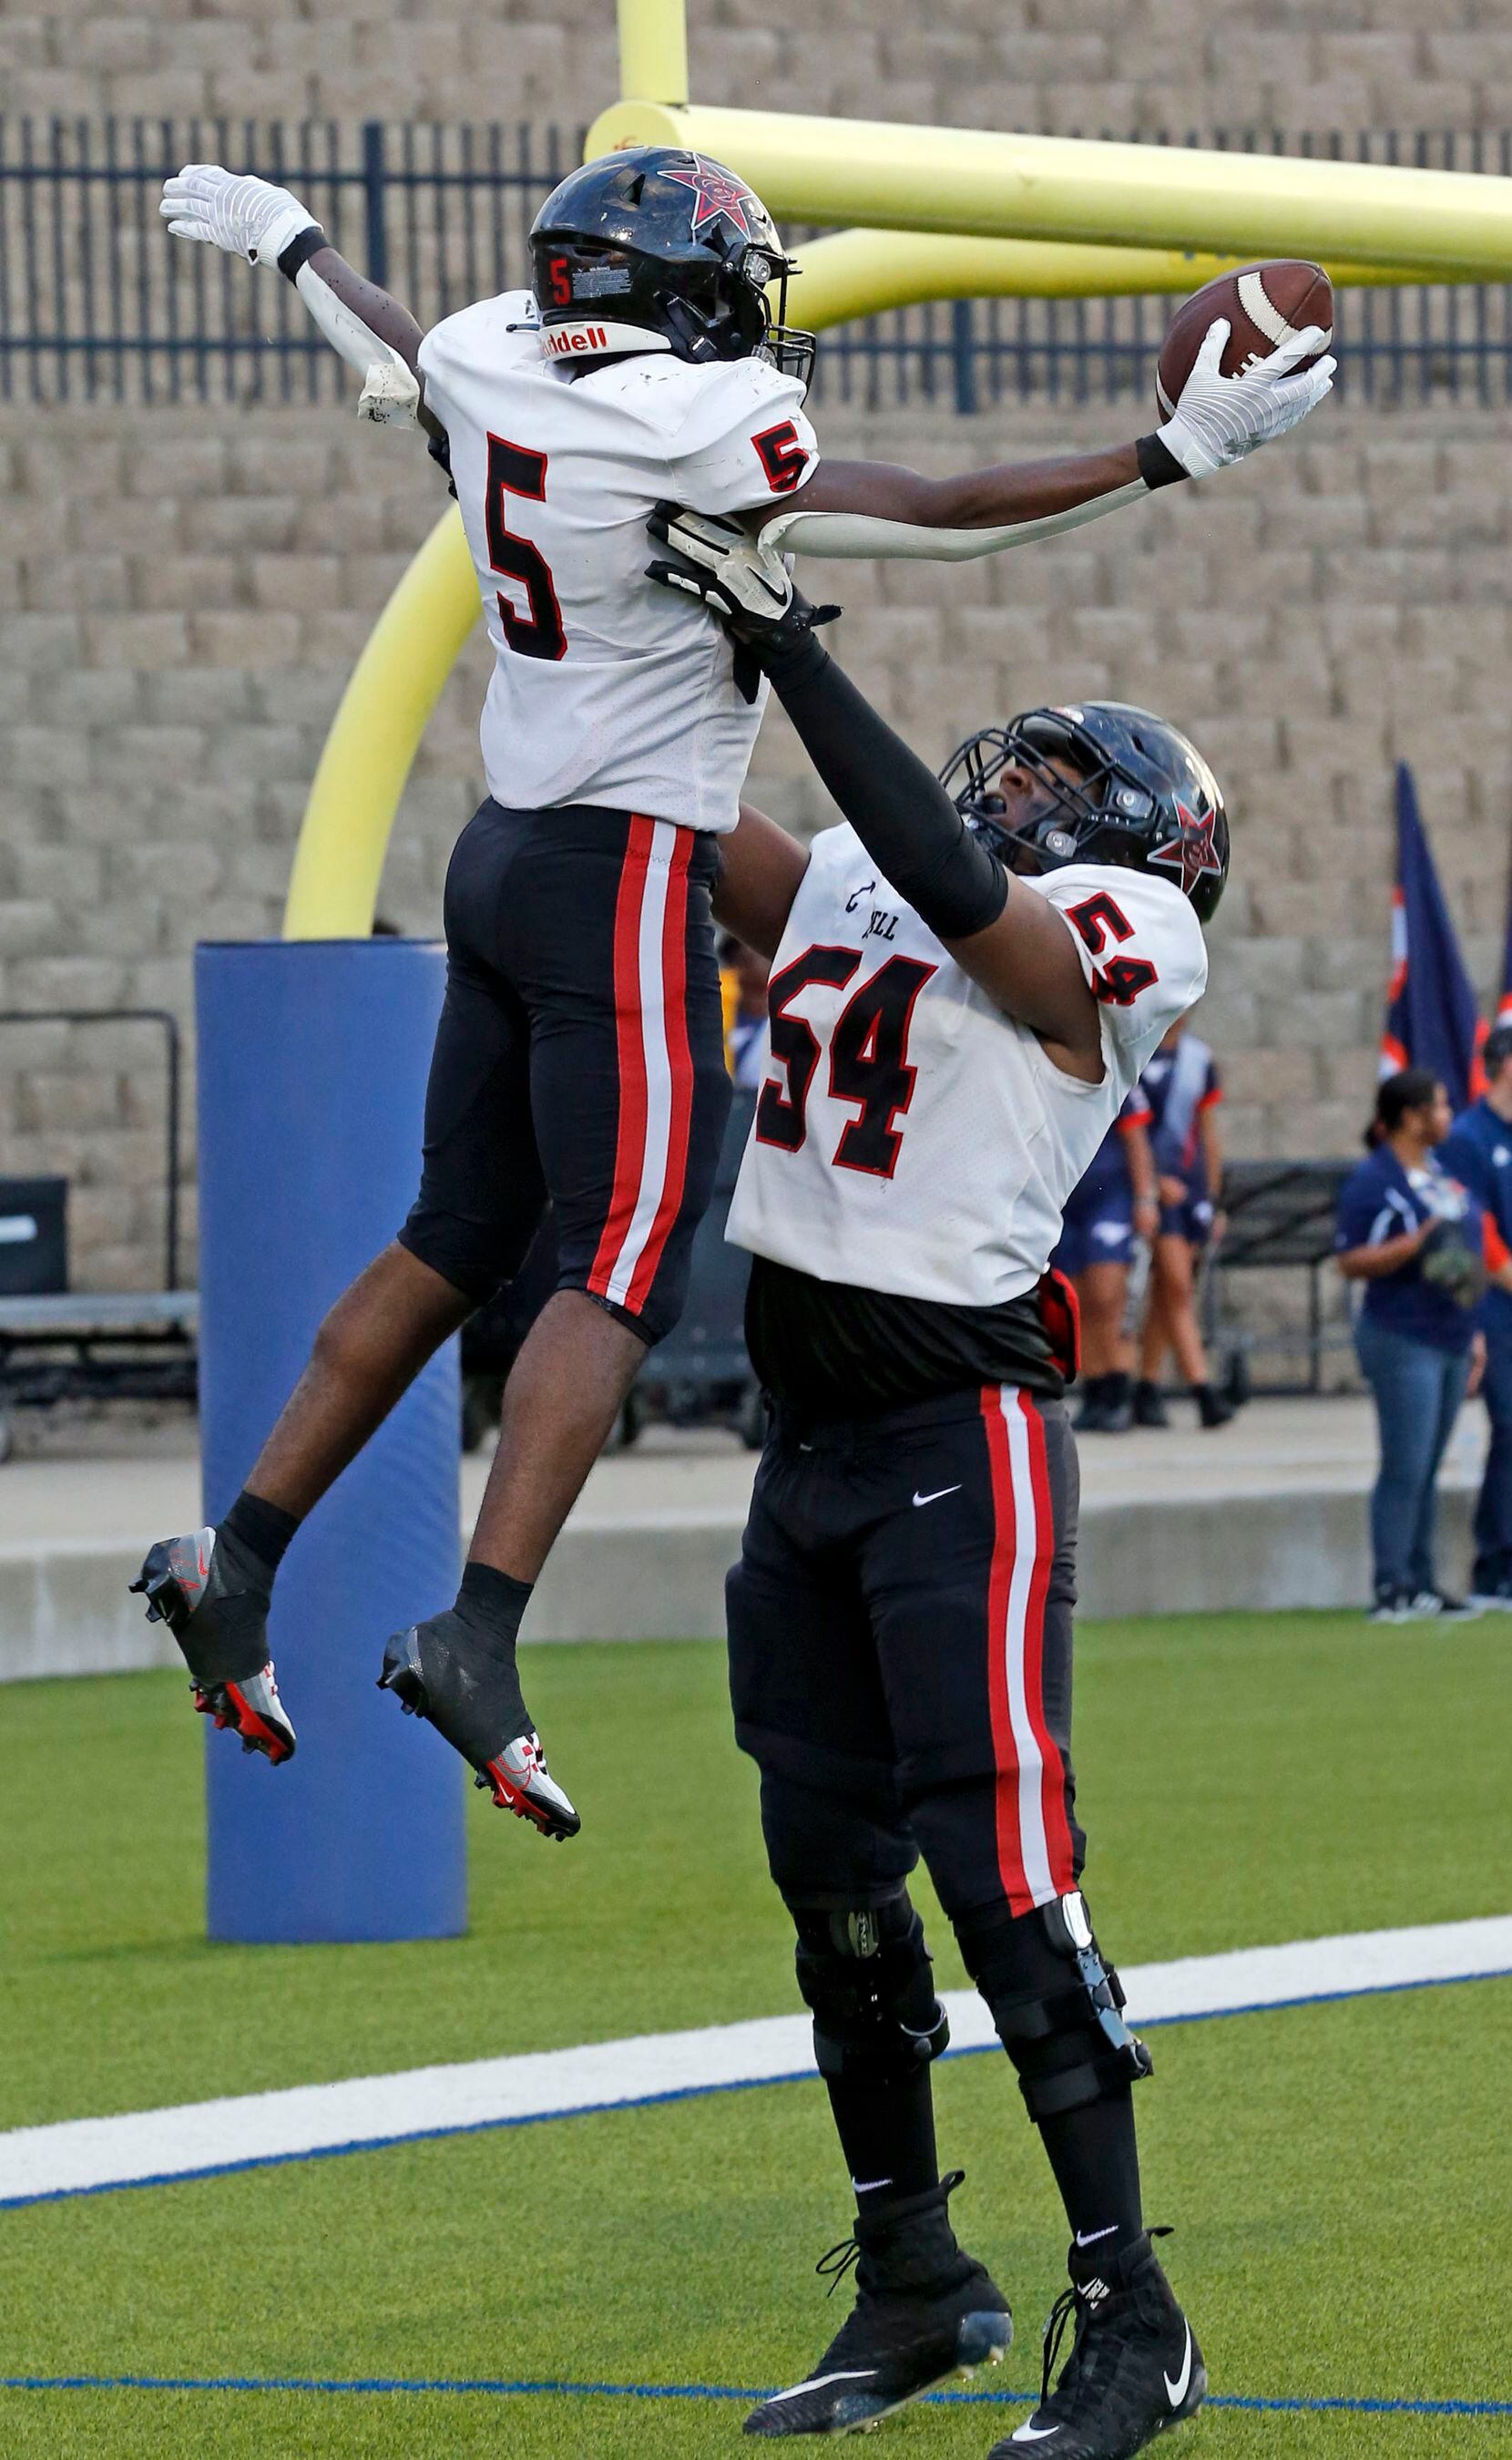 Coppell RB Malkam Wallace (5) is held high in the air by teammate Chimdia Nwaiwu (54) after...